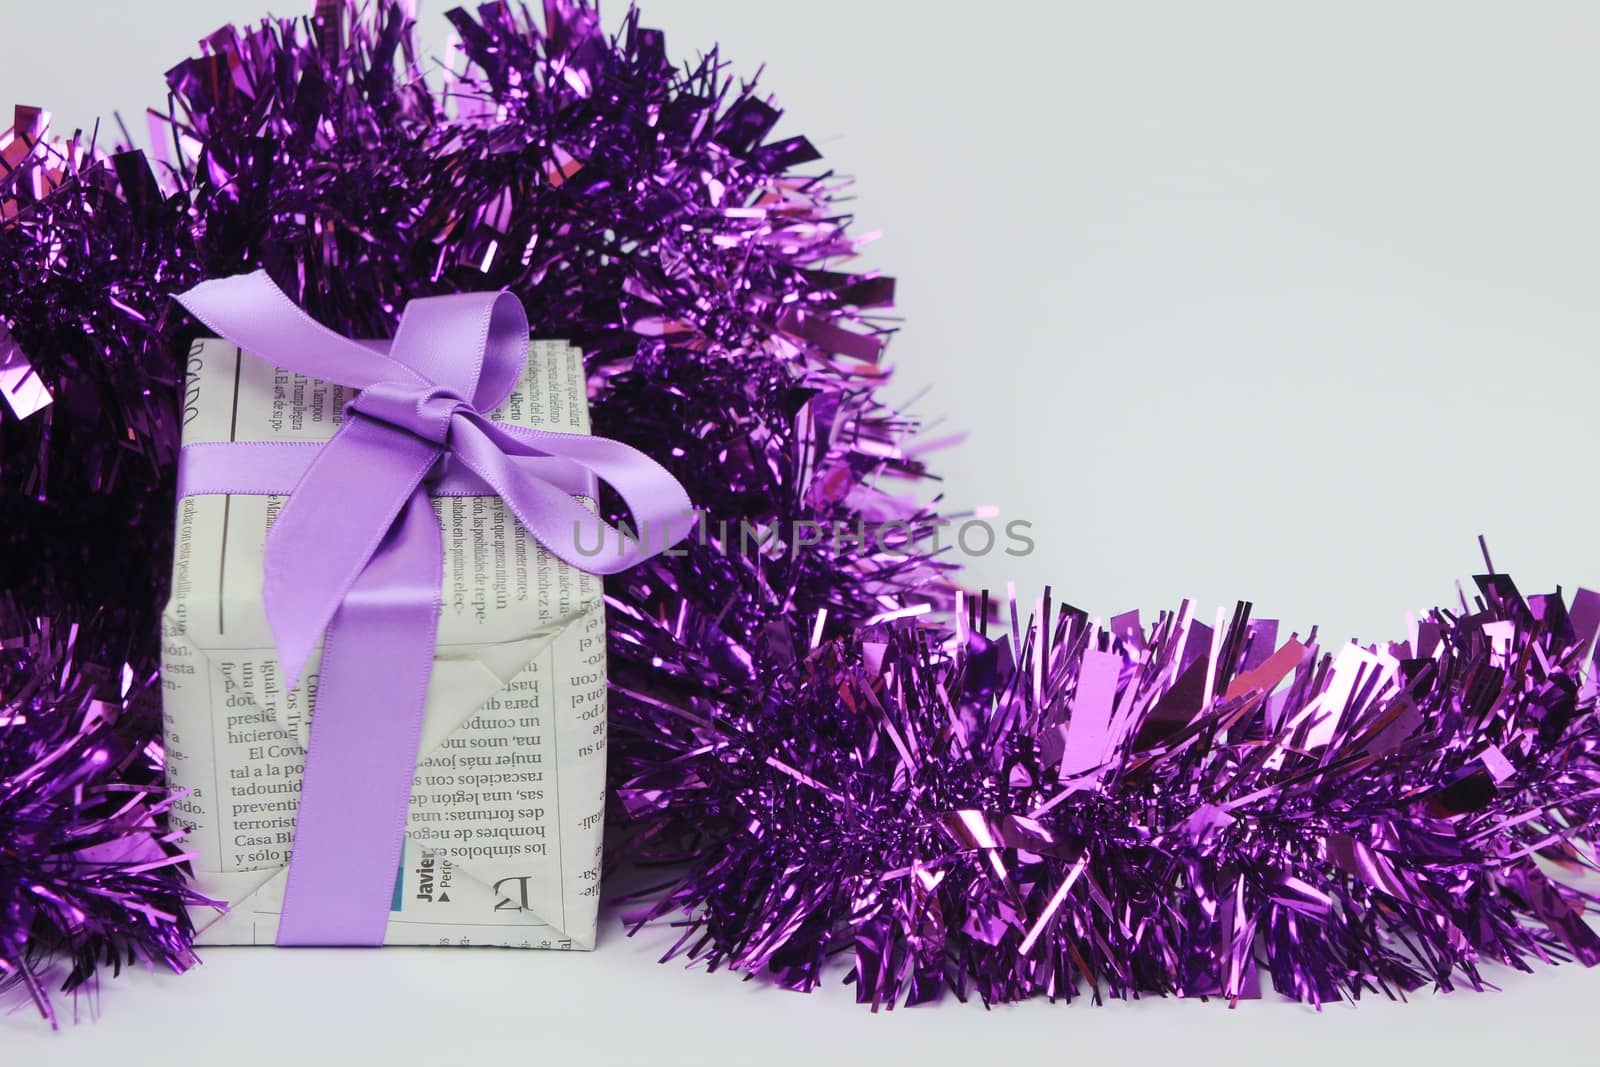 Gifts wrapped in old newspaper on white background by soniabonet